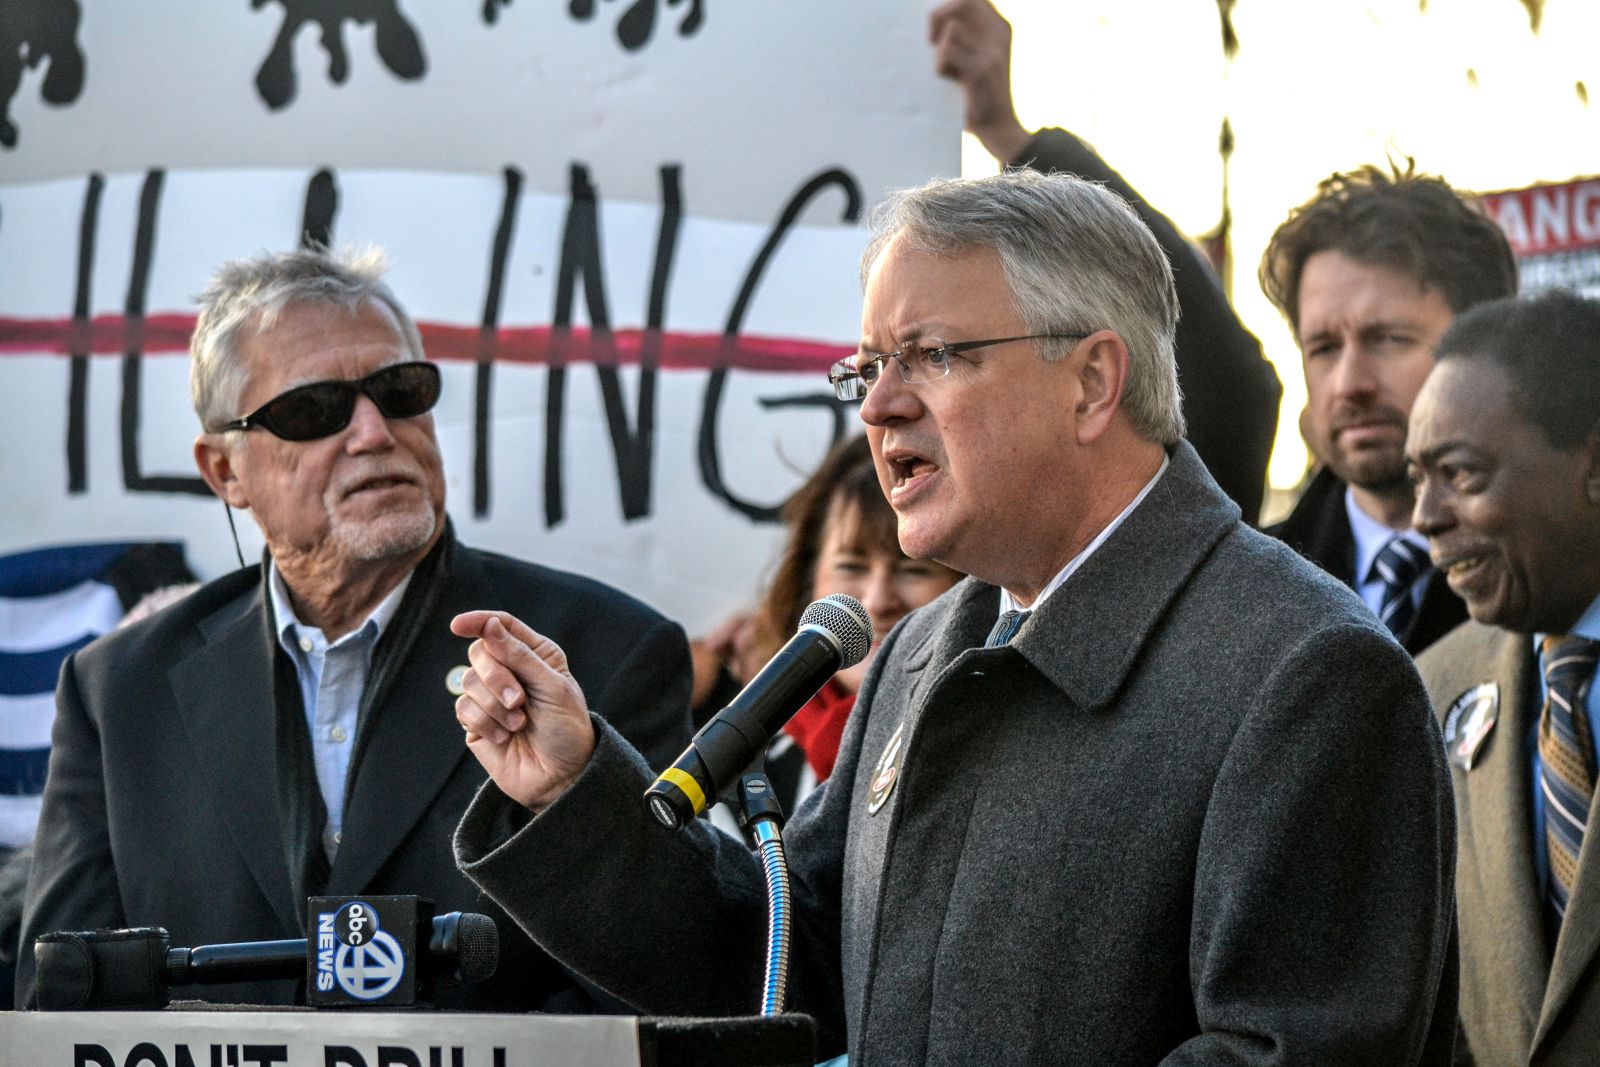 Charleston Mayor John Tecklenburg said offshore drilling activities have no place in the Lowcountry. Residents held up anti-drilling signs while he spoke during a news conference Tuesday on Broad Street. (Photo/Liz Segrist)